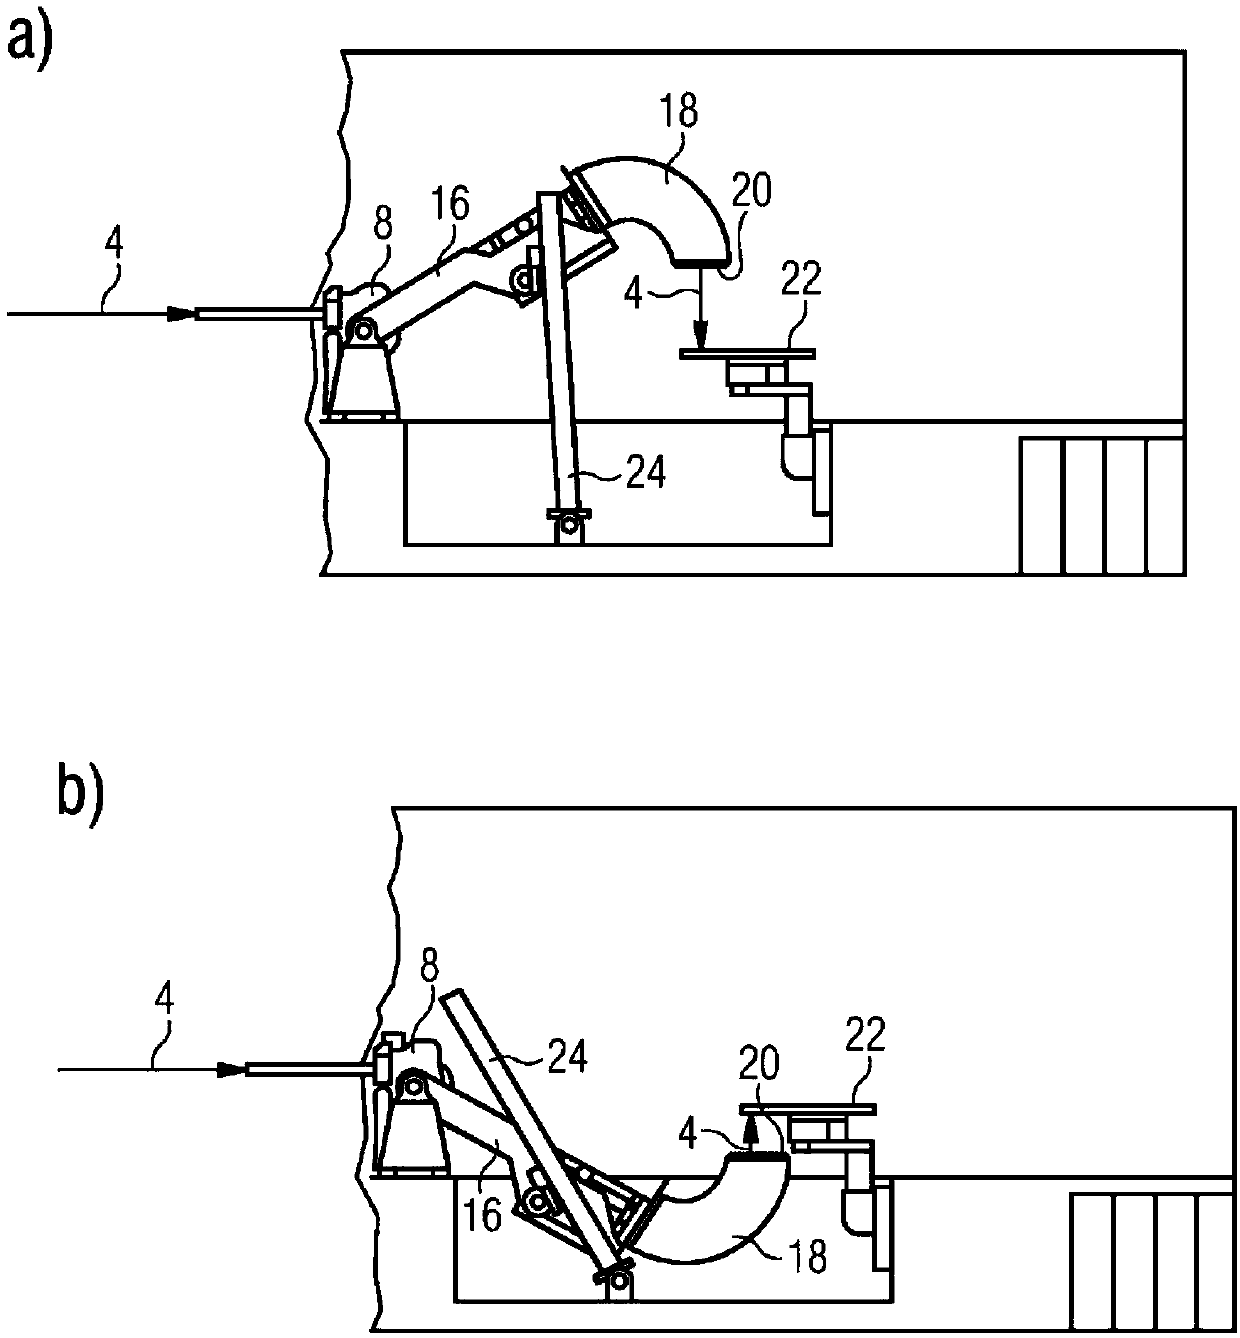 A gantry for particle therapy as an arm rotating in the longitudinal plane